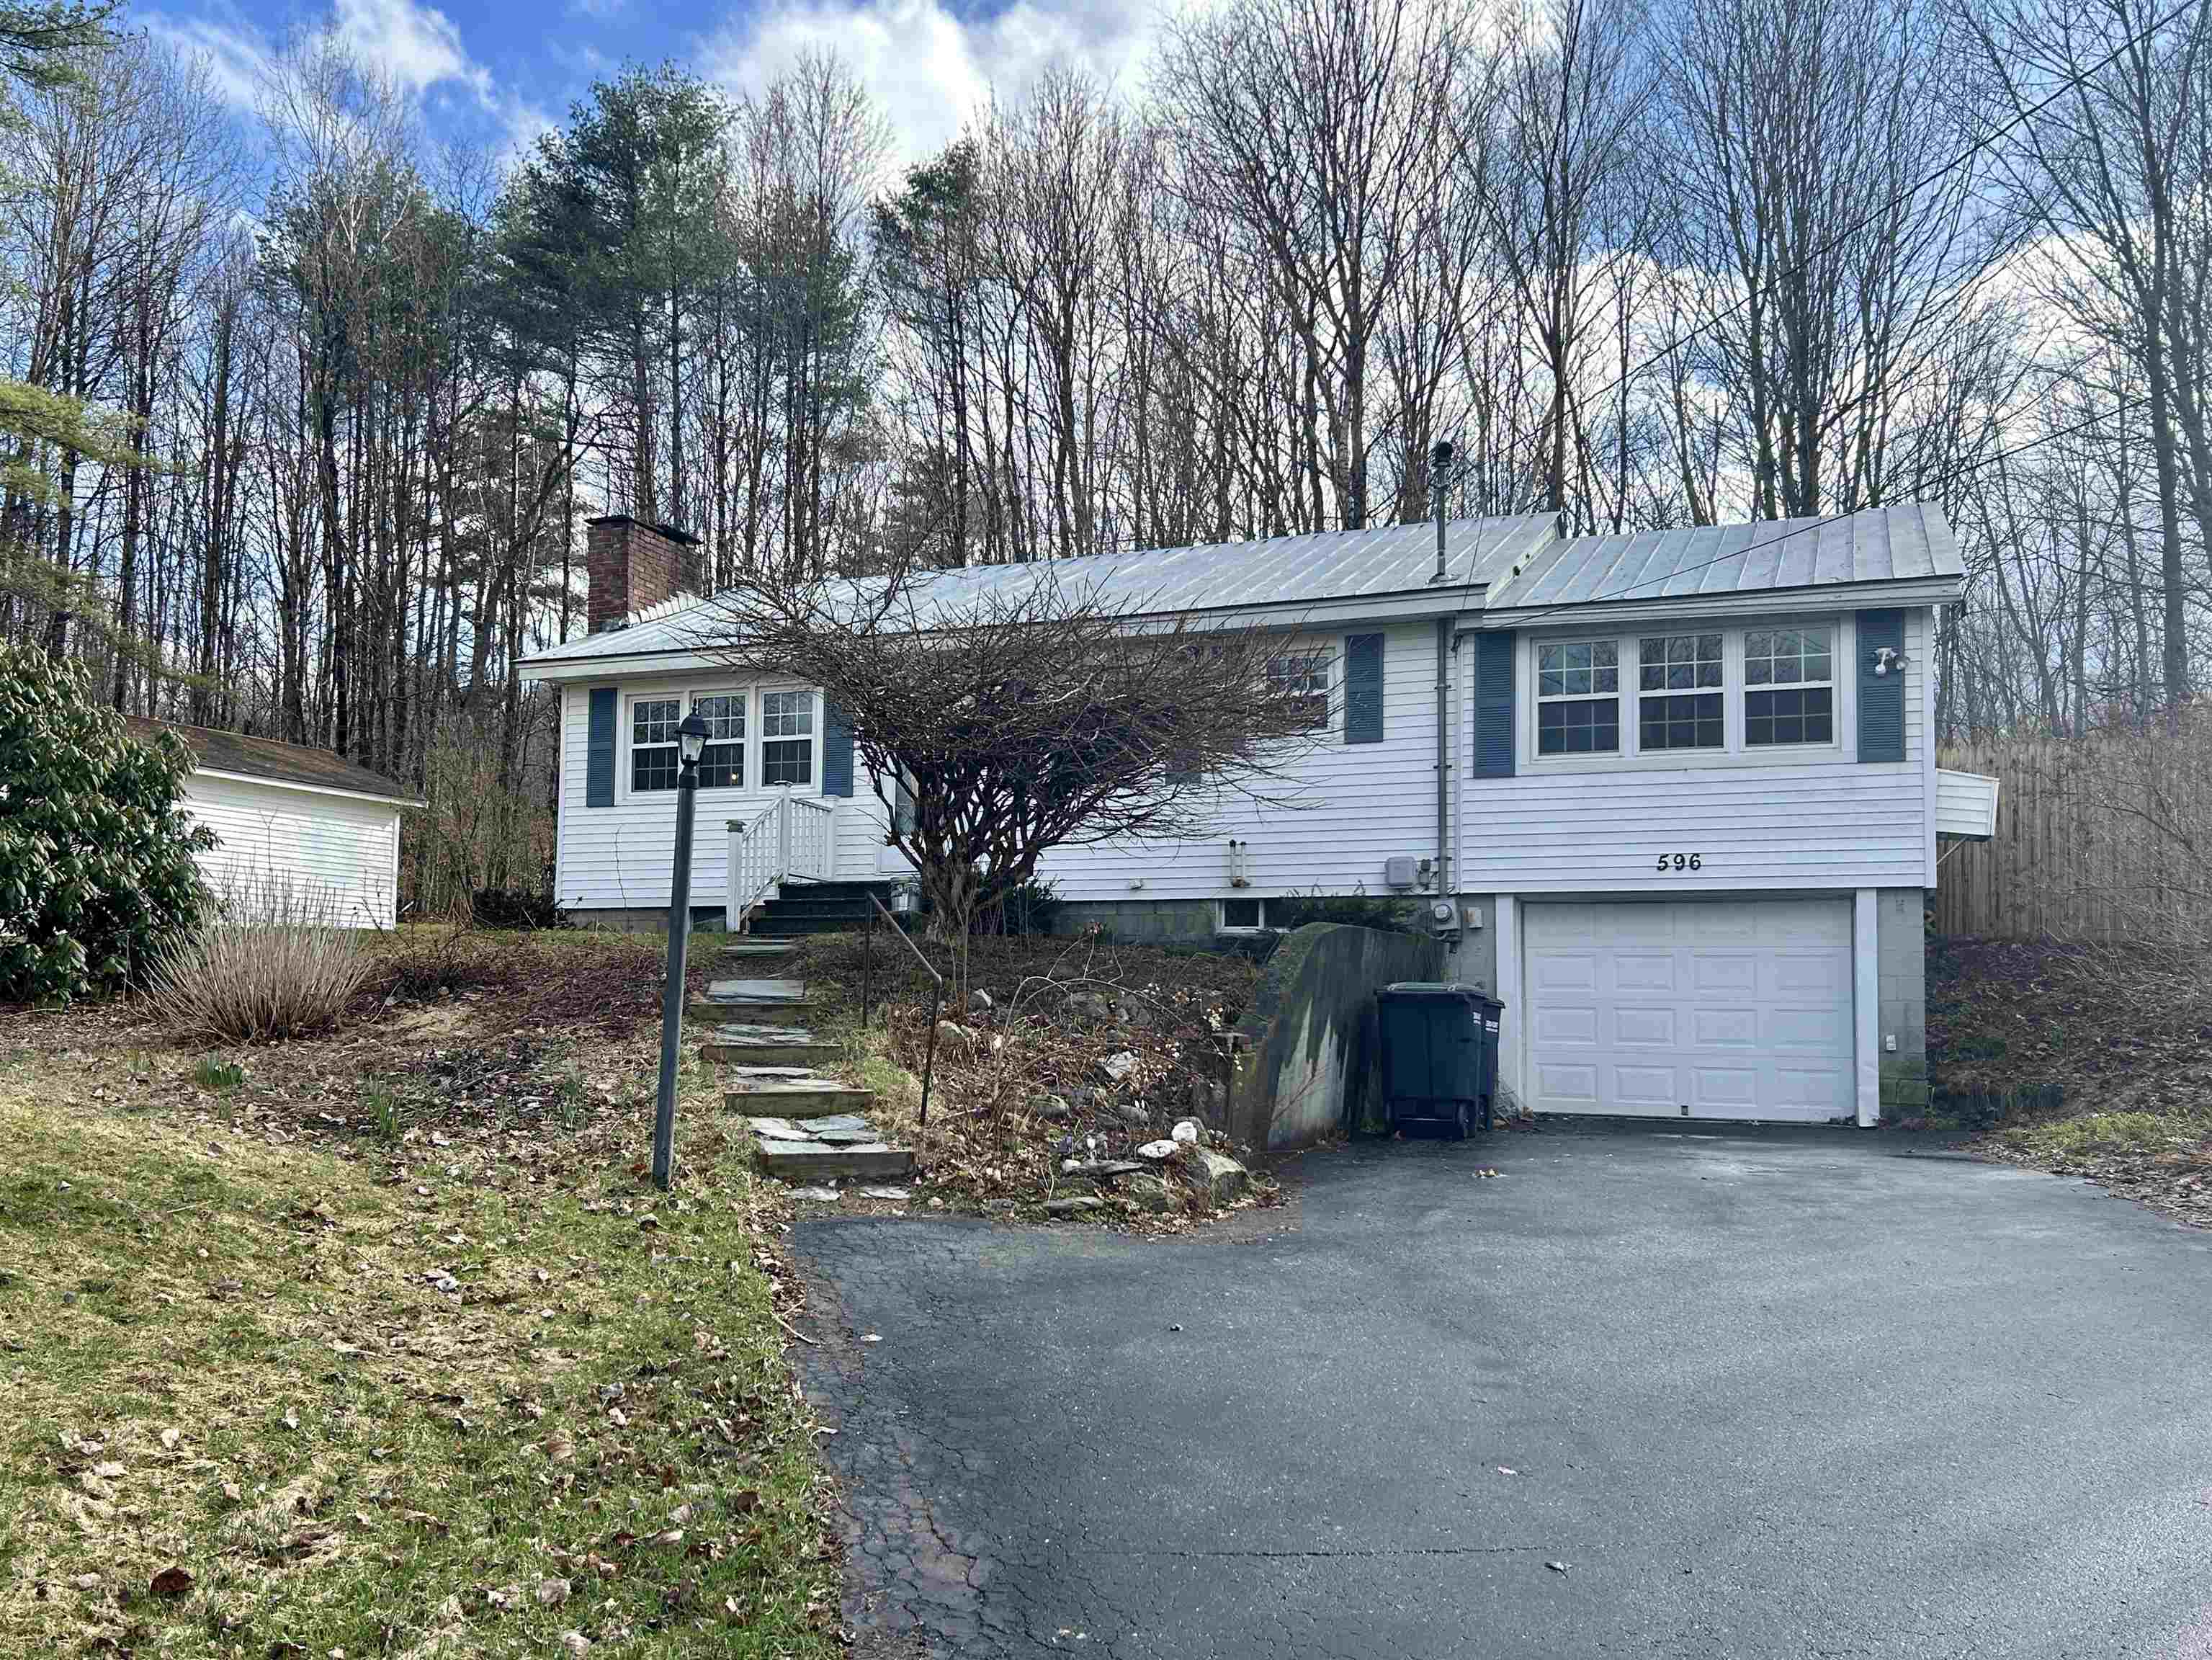 1 Story Single Family Home in Enfield NH